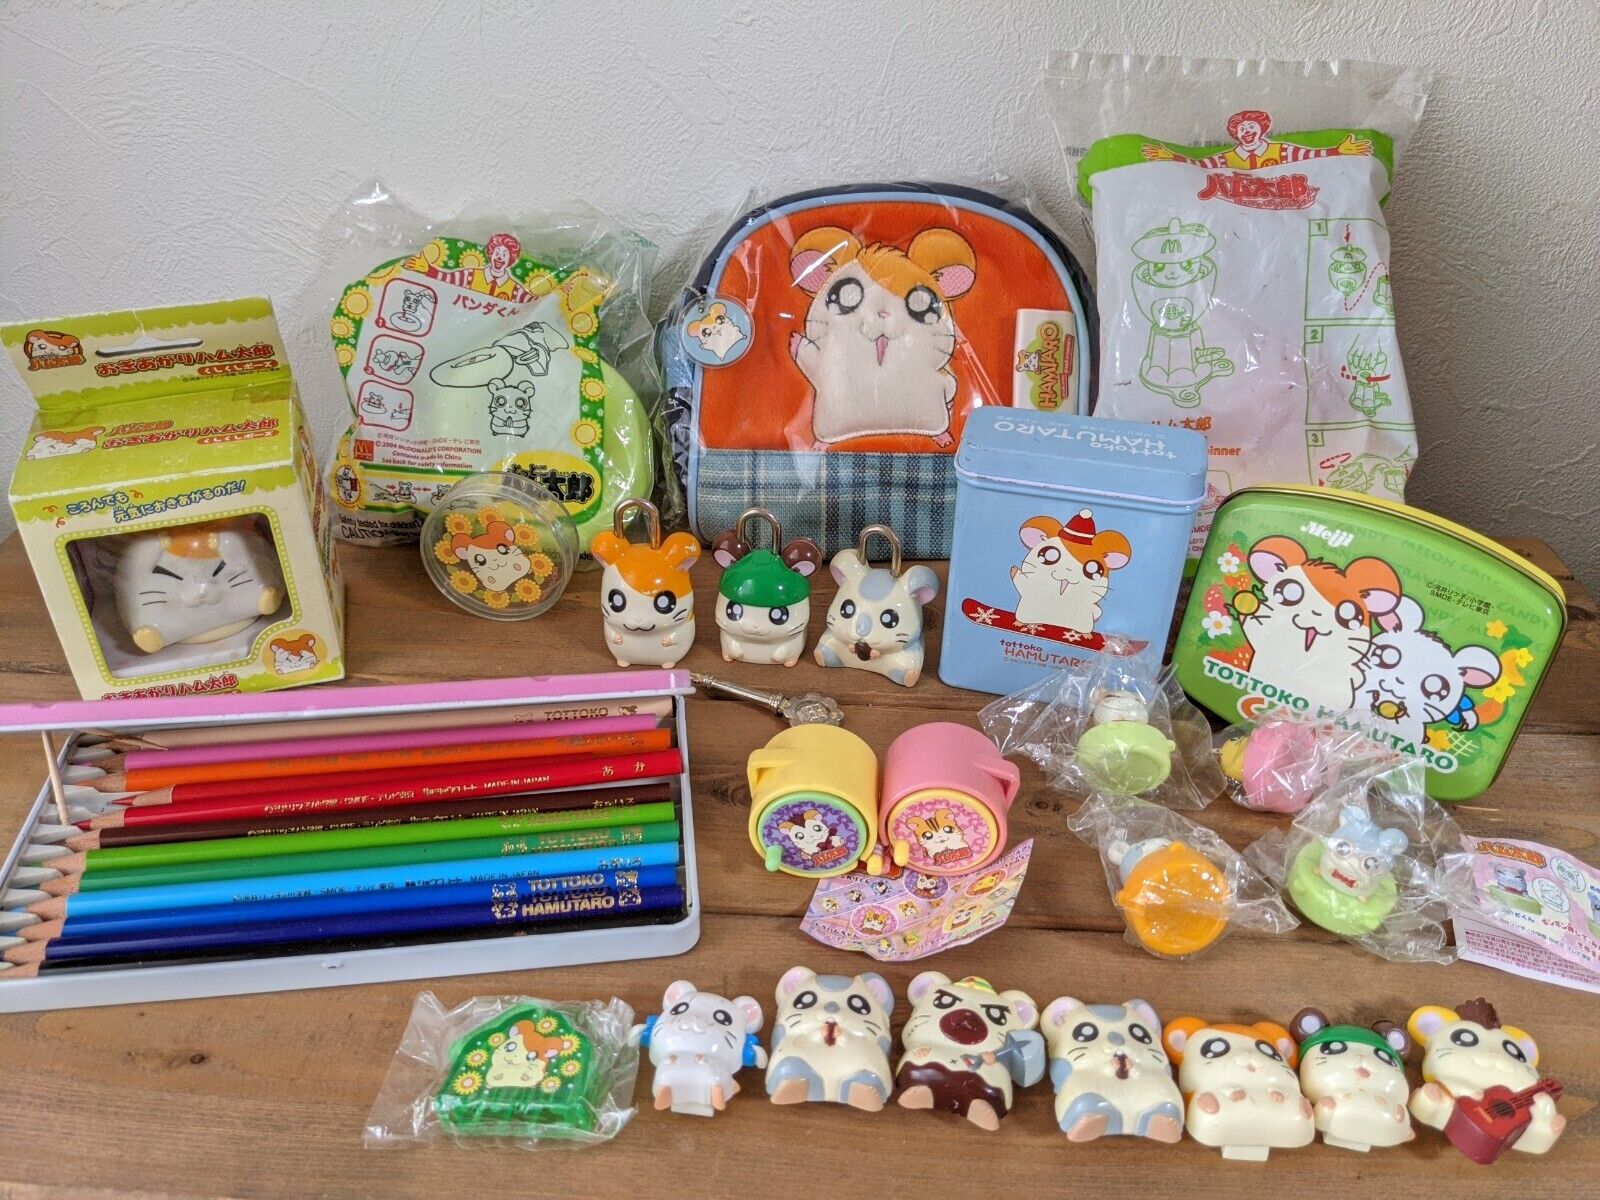 Hamtaro Pouche Sticker Can boxe Colored pencils Stamp Magnet Rise-up dolls etc